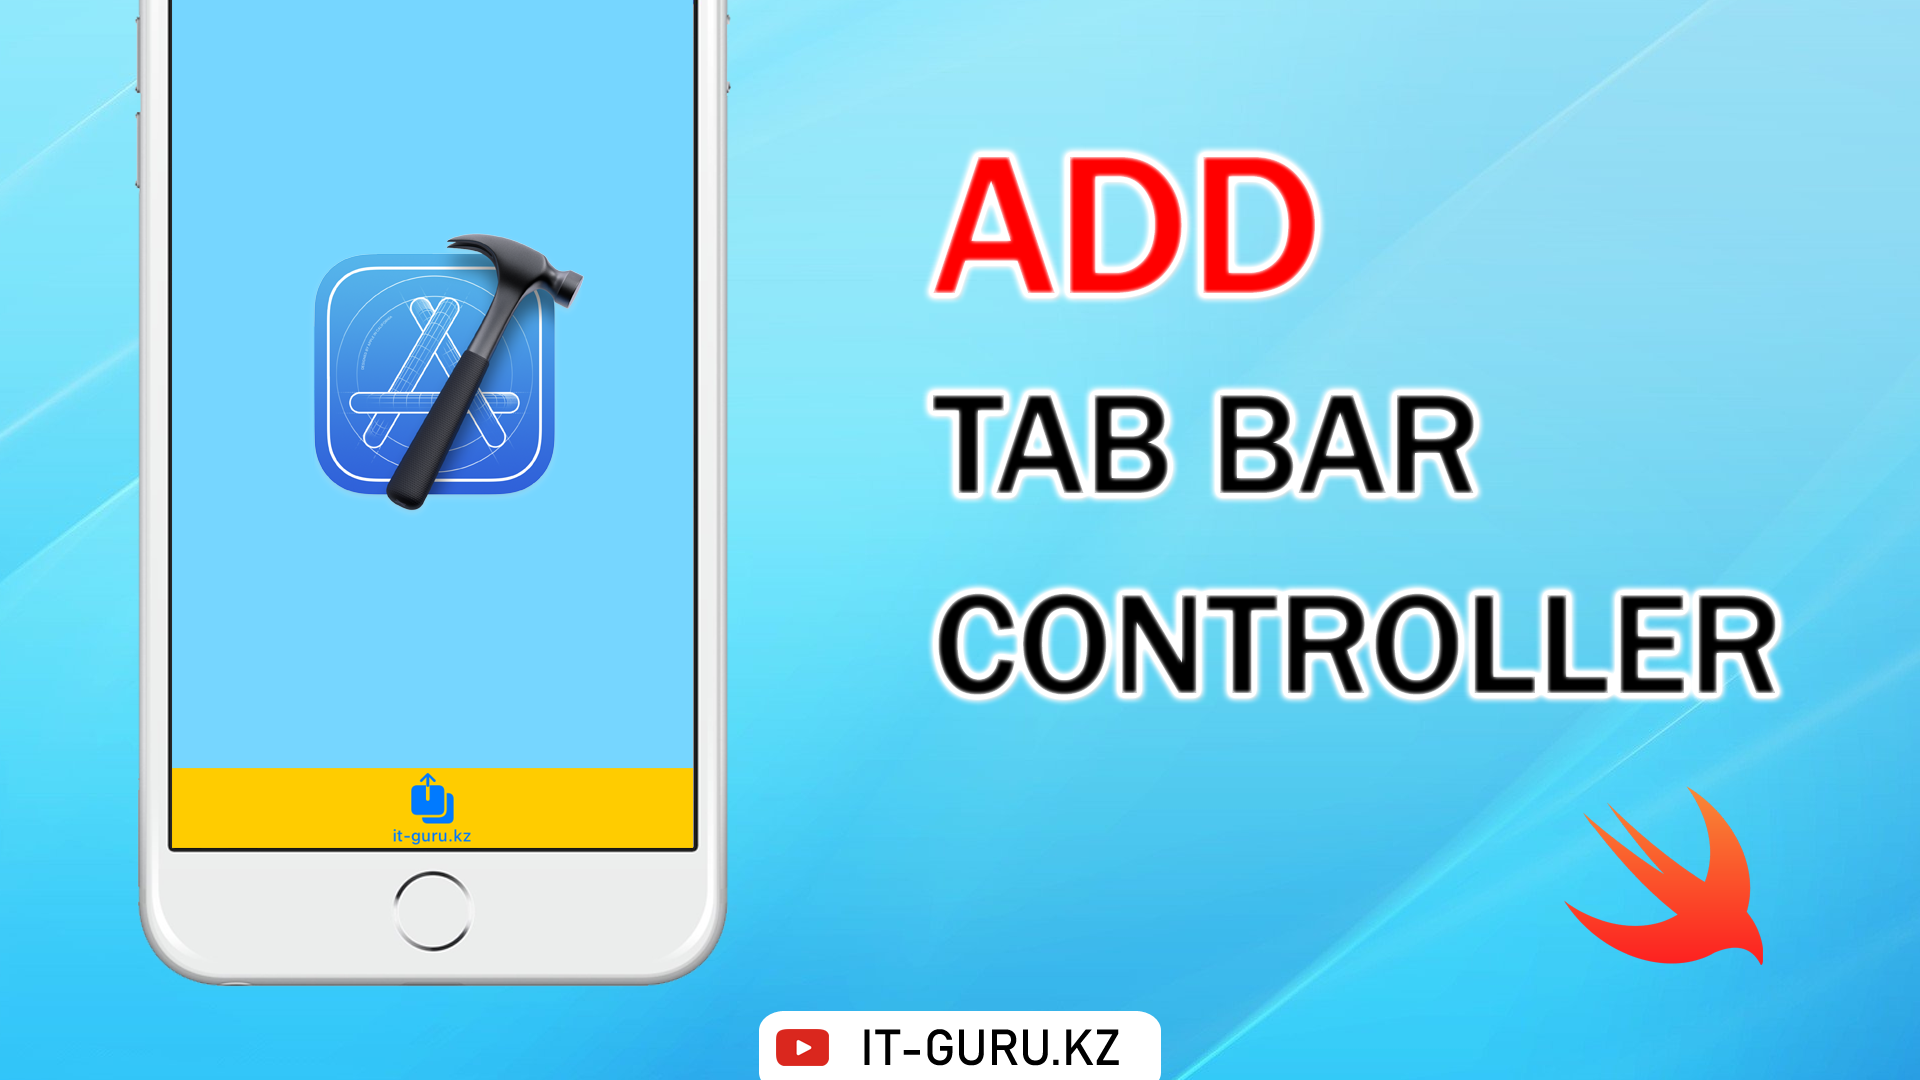 How to add Tab Bar Controller to your Xcode project